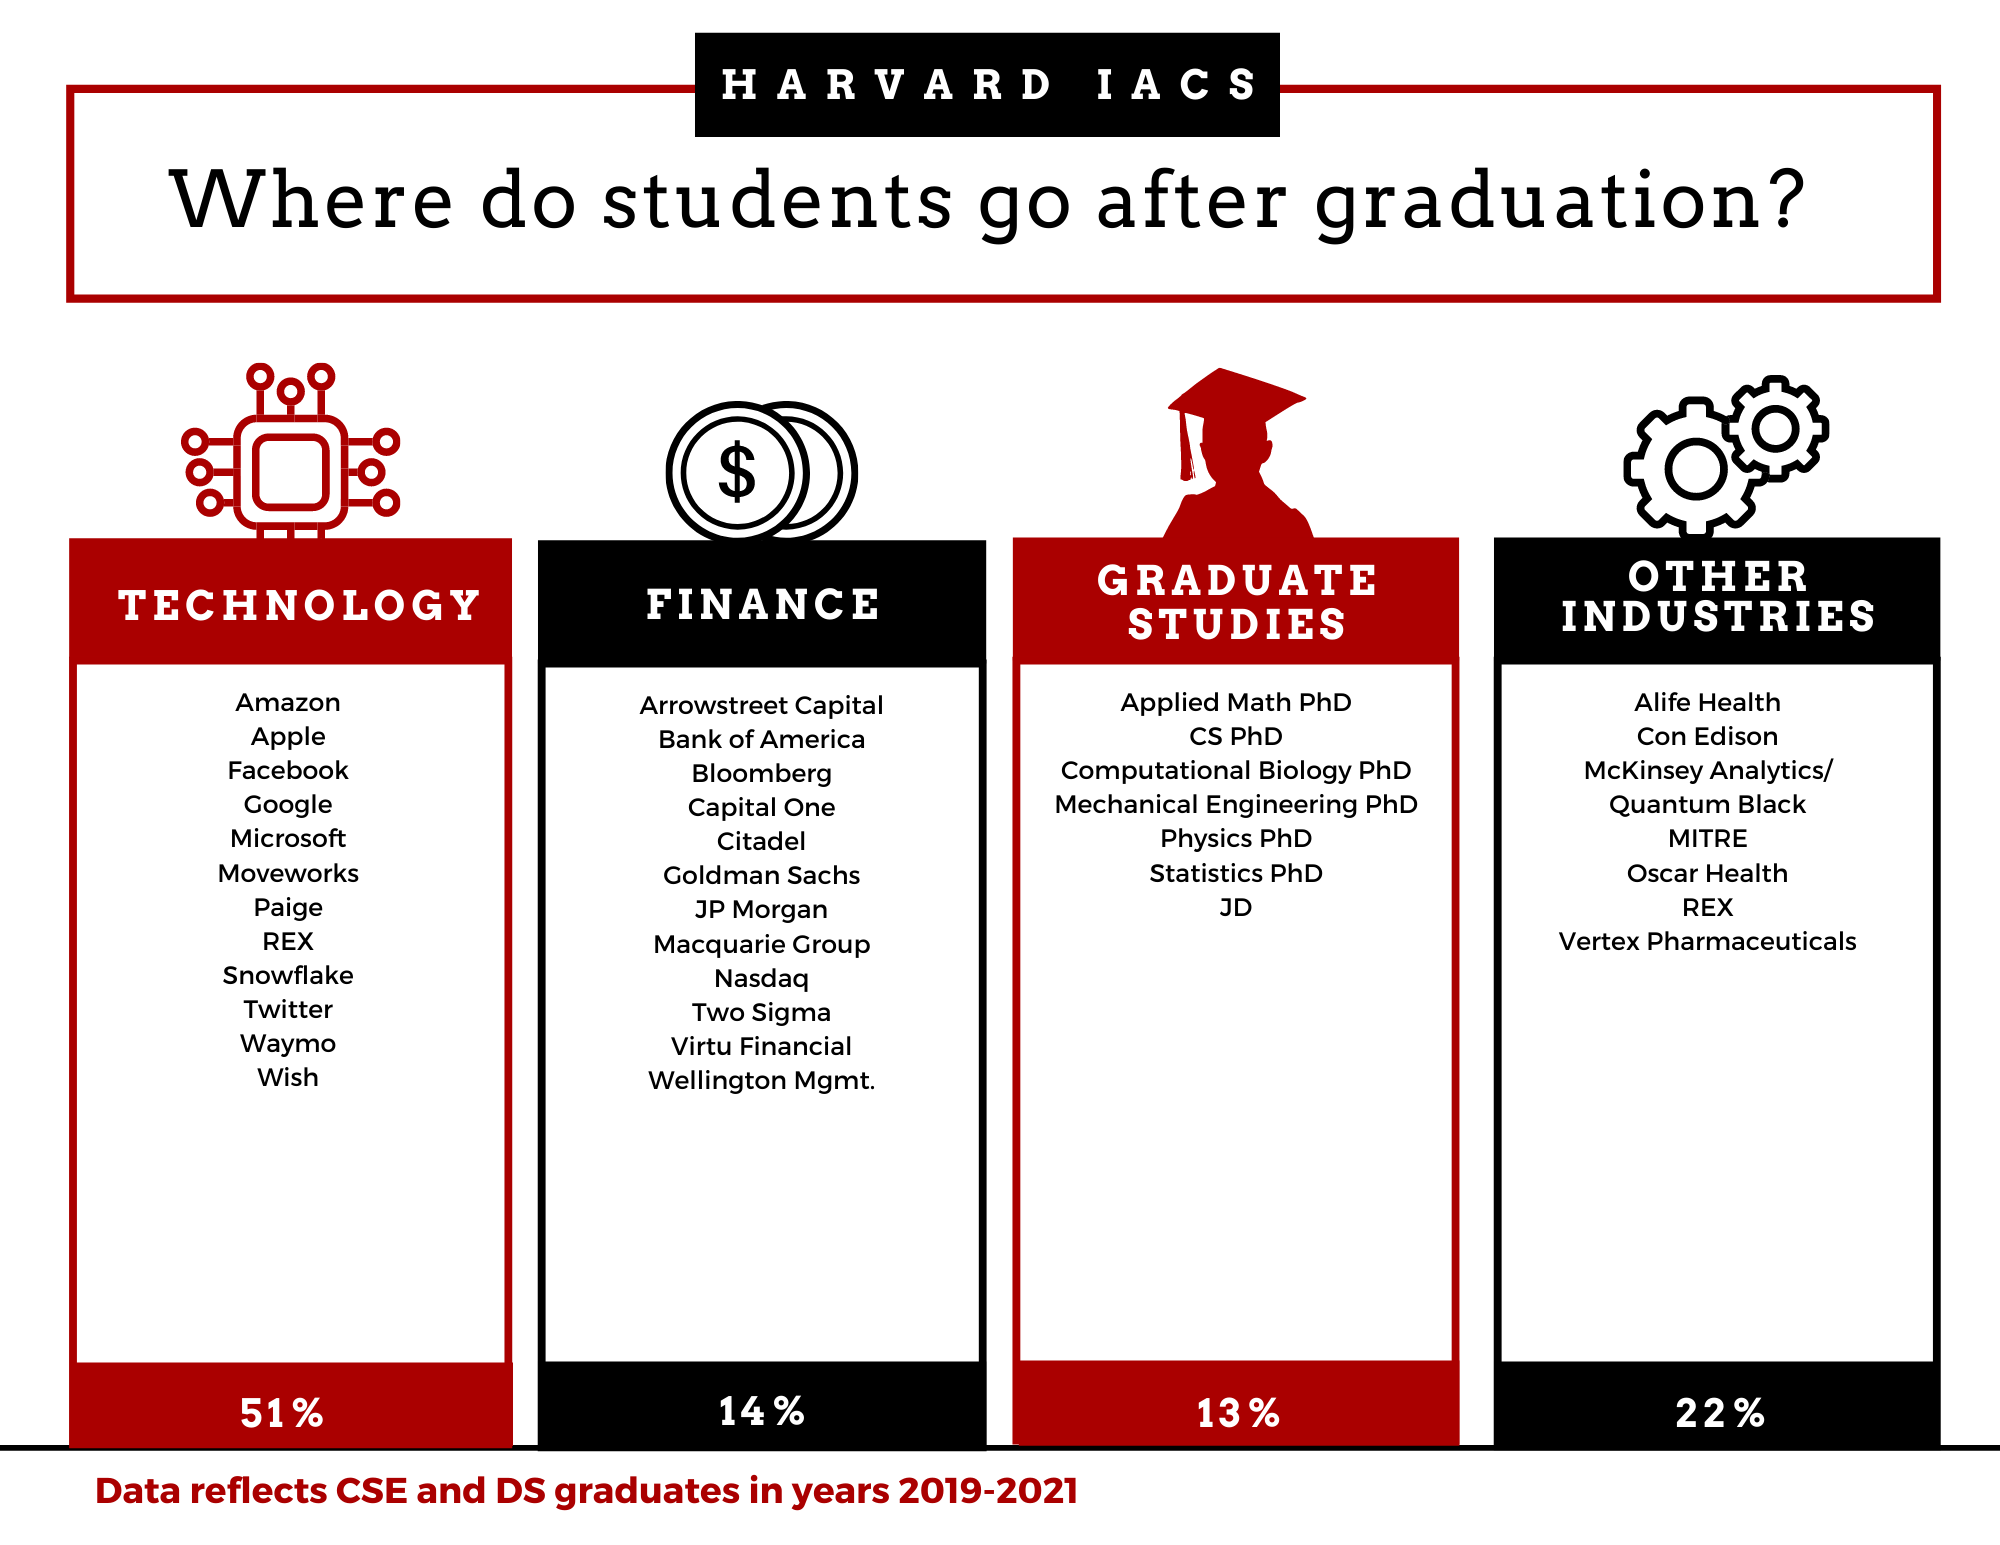 Where do students go after graduation?